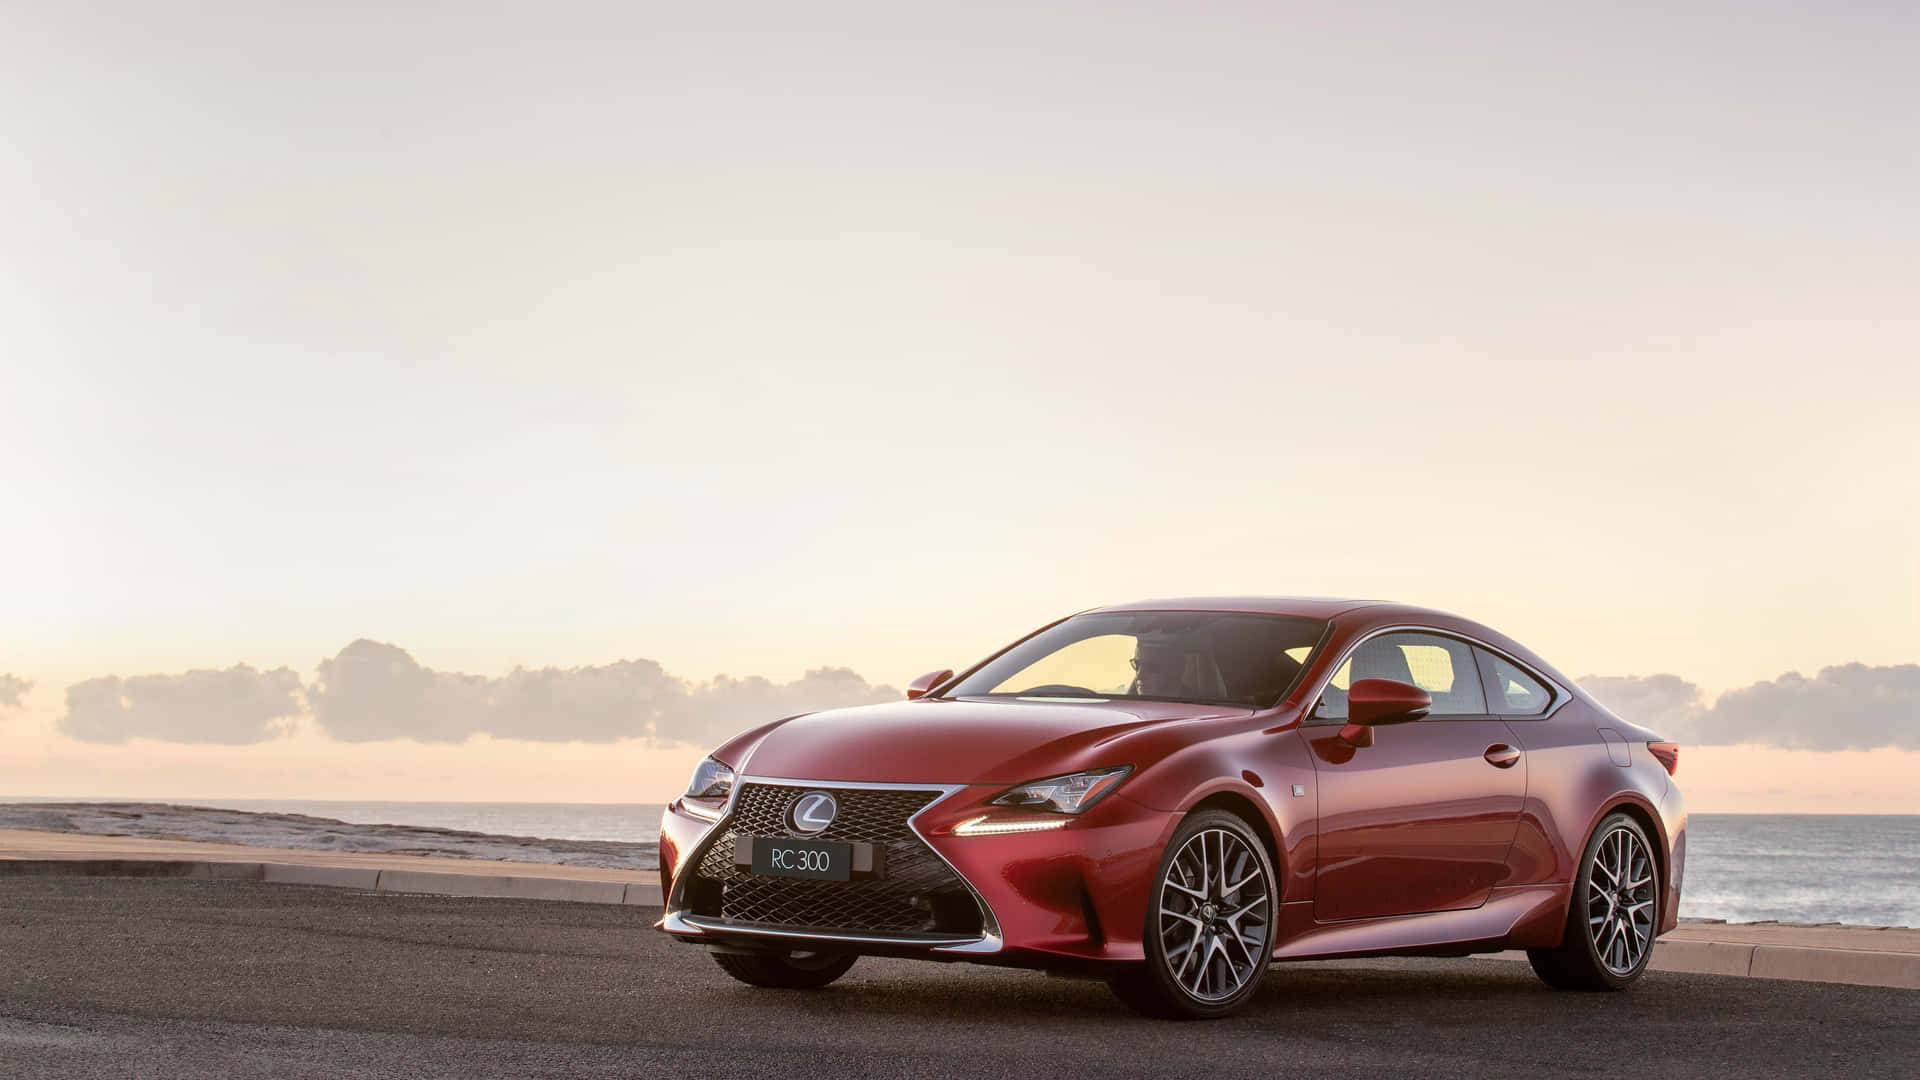 The Red Lexus Rc - F Coupe Is Parked On The Beach Wallpaper